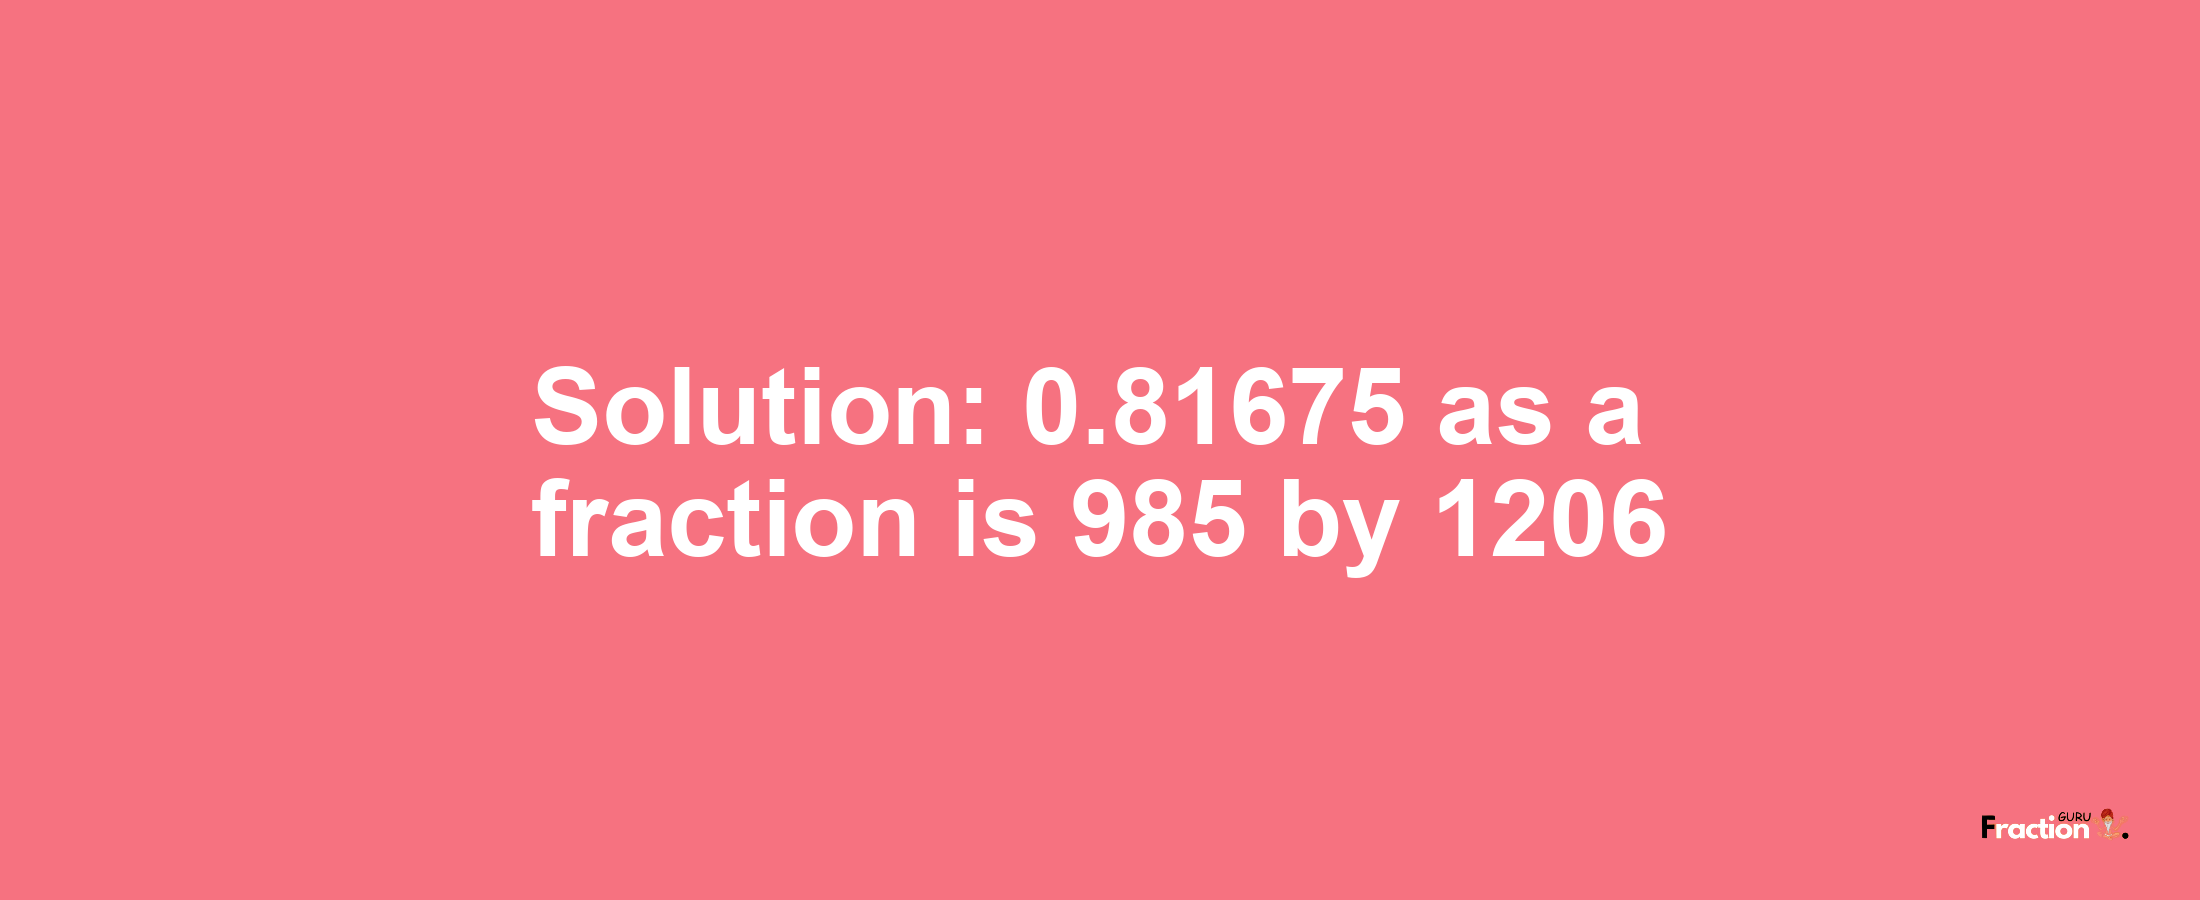 Solution:0.81675 as a fraction is 985/1206